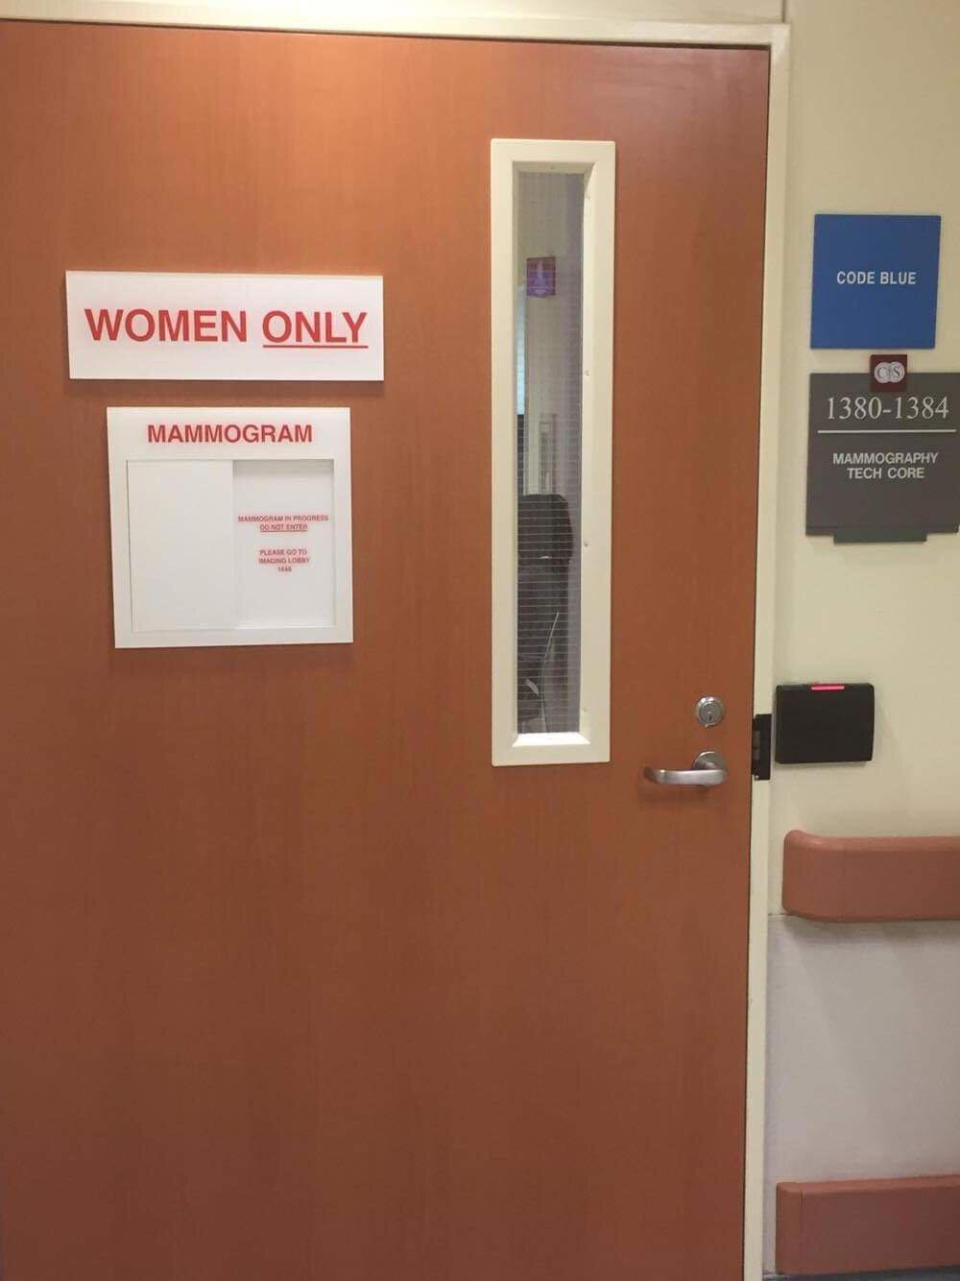 Mammograms for the author's husband were done behind doors with signs boldly exclaiming &ldquo;WOMEN ONLY.&rdquo; (Photo: Tammy Porter)